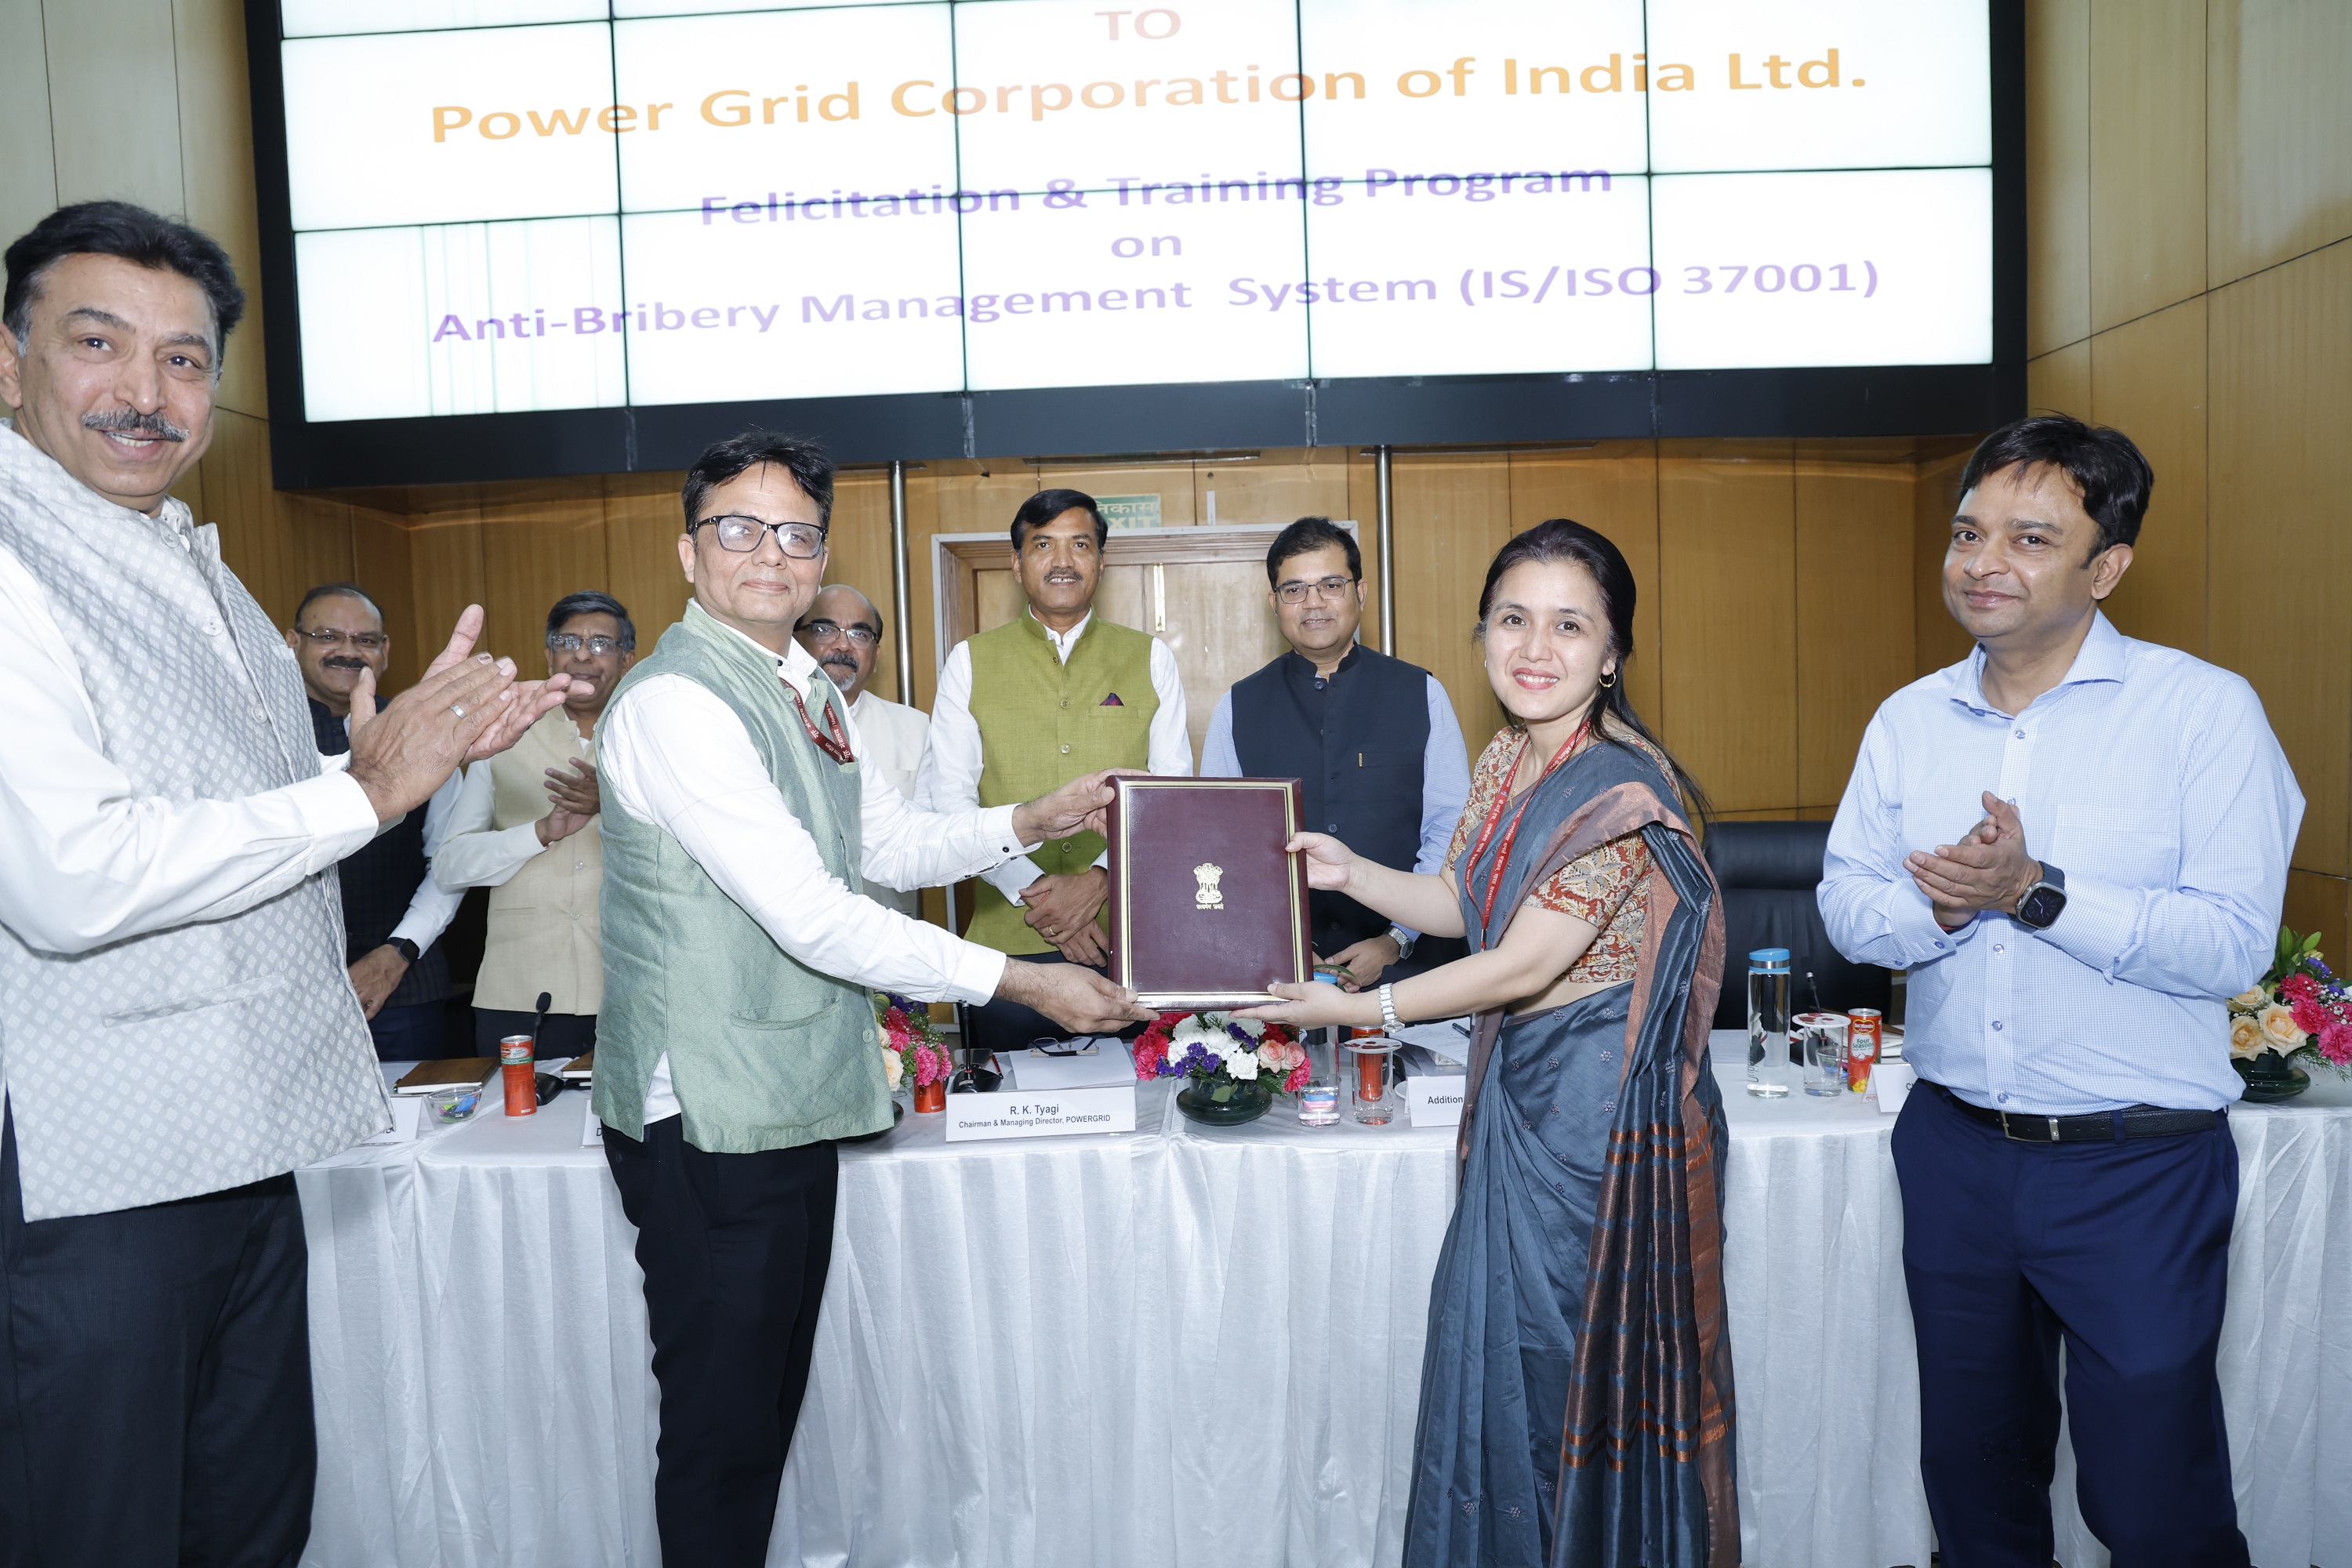 POWERGRID has been conferred the Best CSR Practices Award by the World CSR Congress